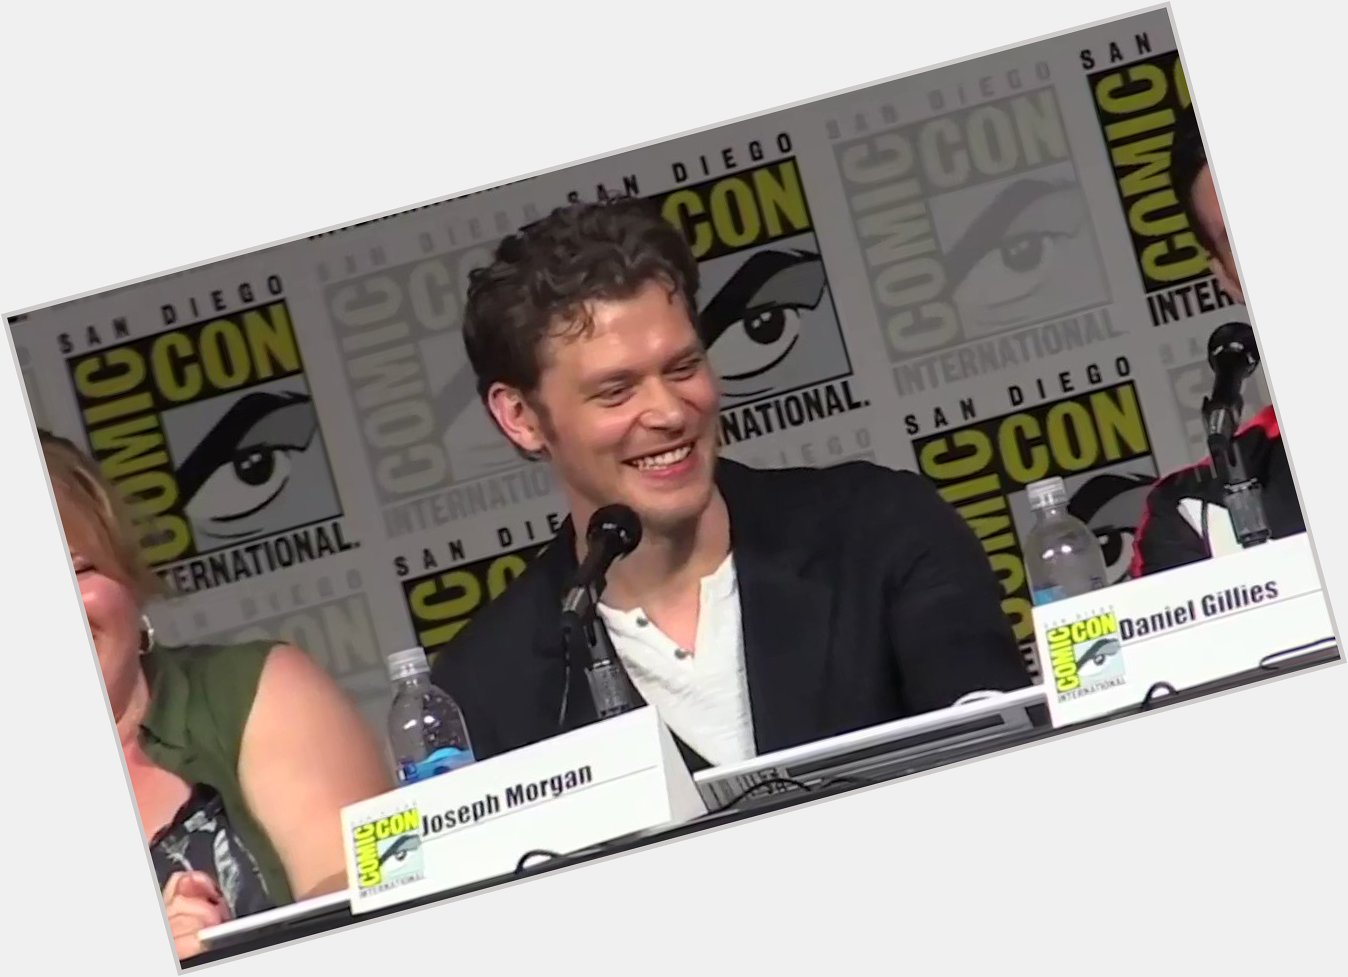 Happy birthday to the joseph morgan! love you so so much thanks for always putting a smile on my face 